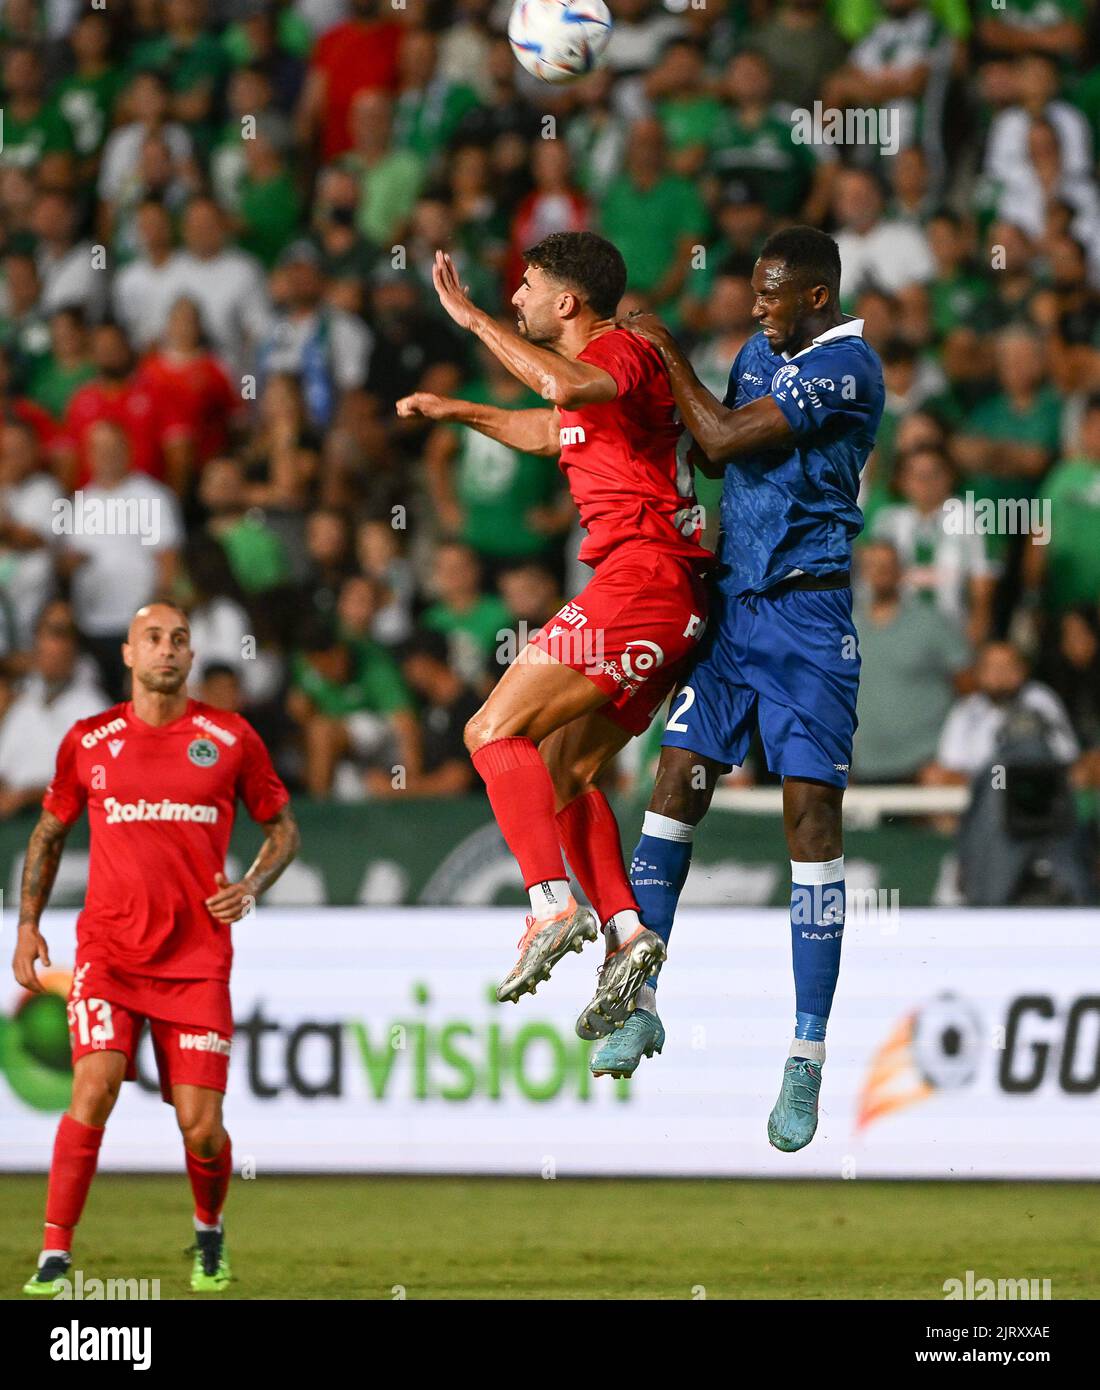 Omonia's Panagiotis Zachariou and Gent's Sulayman Marreh fight for the ball during a soccer game between Cypriot Omonia Nicosia and Belgian KAA Gent in Nicosia, Cyprus on Thursday 25 August 2022, the return leg of the play-offs for the UEFA Europa League competition. BELGA PHOTO DAVID CATRY Stock Photo